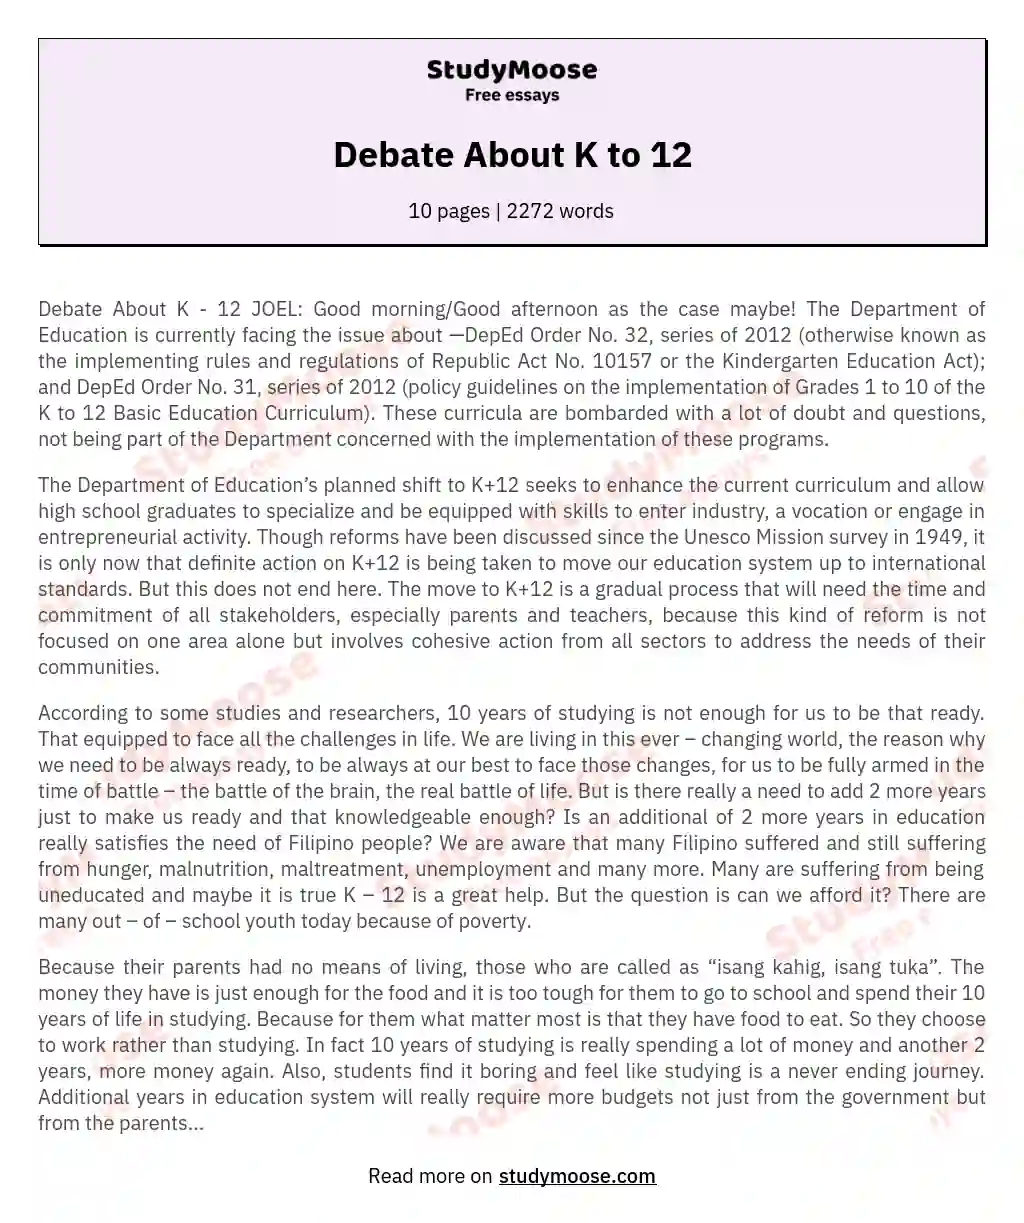 Debate About K to 12 essay